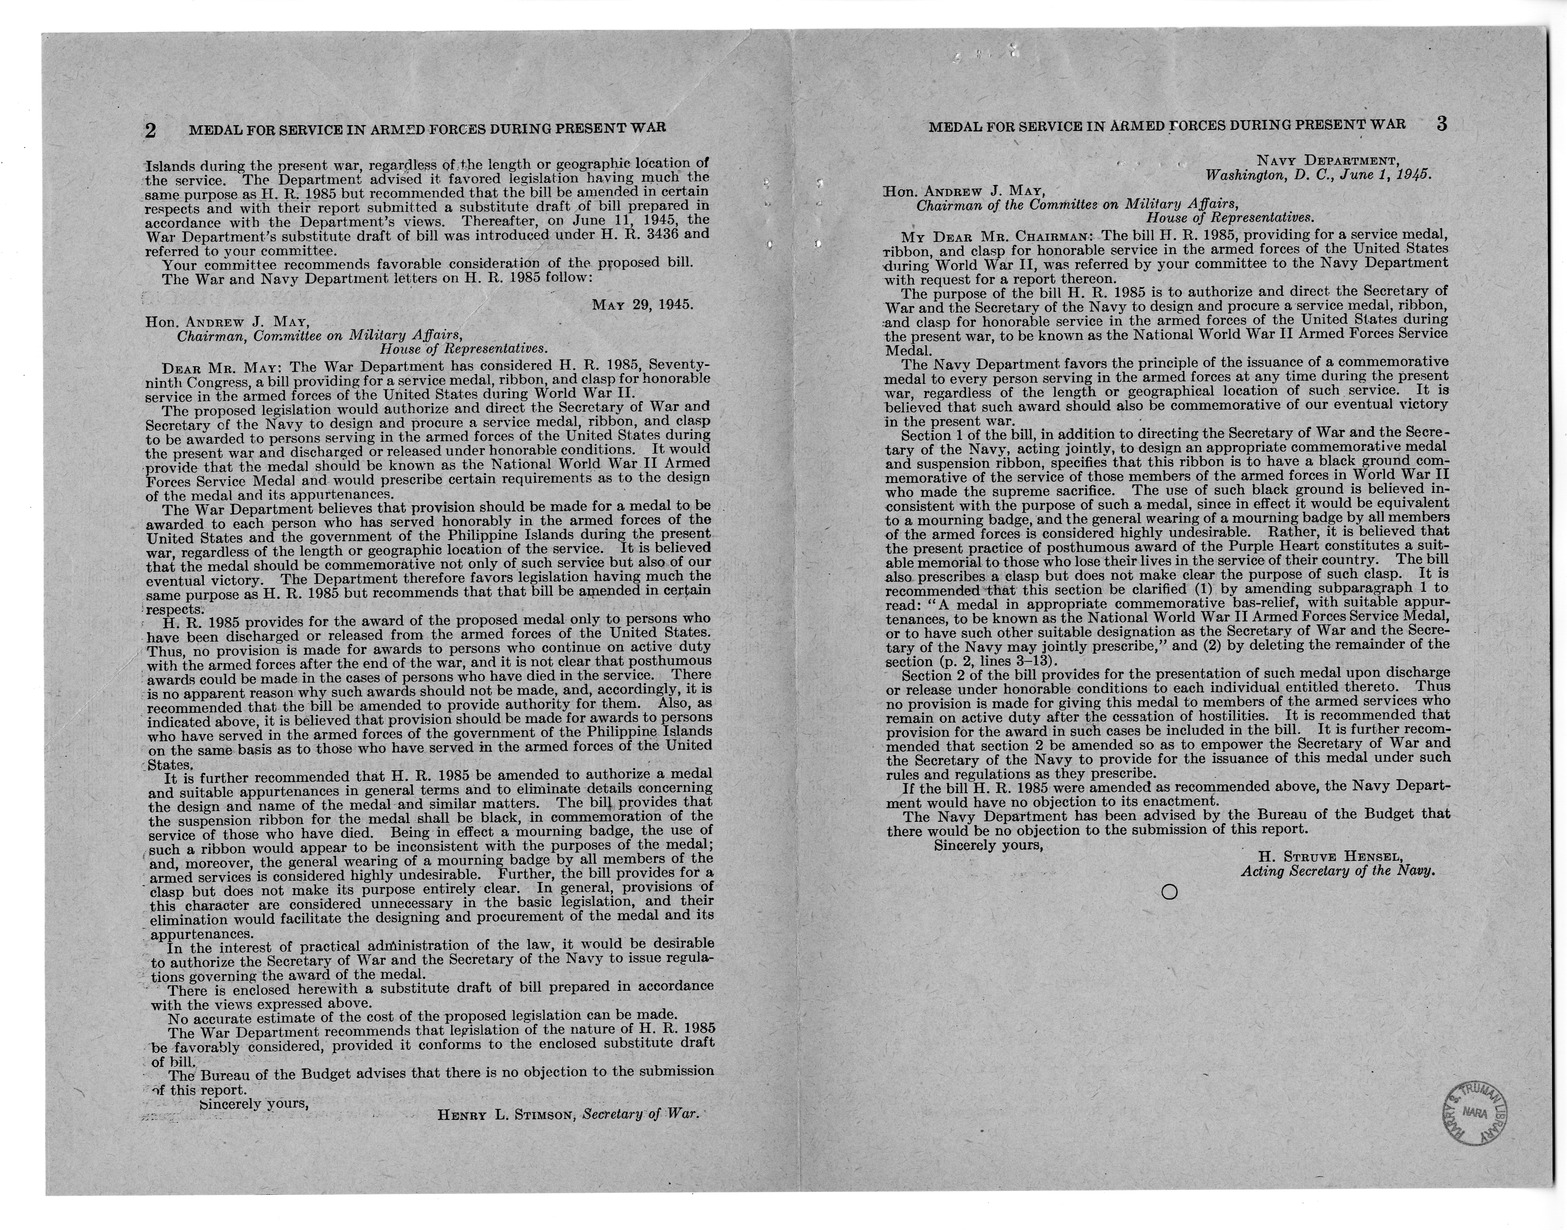 Memorandum from Frederick Bailey to M. C. Latta, H.R. 3436, Providing for a Medal for Service in the Armed Forces During the Present War, with Attachments